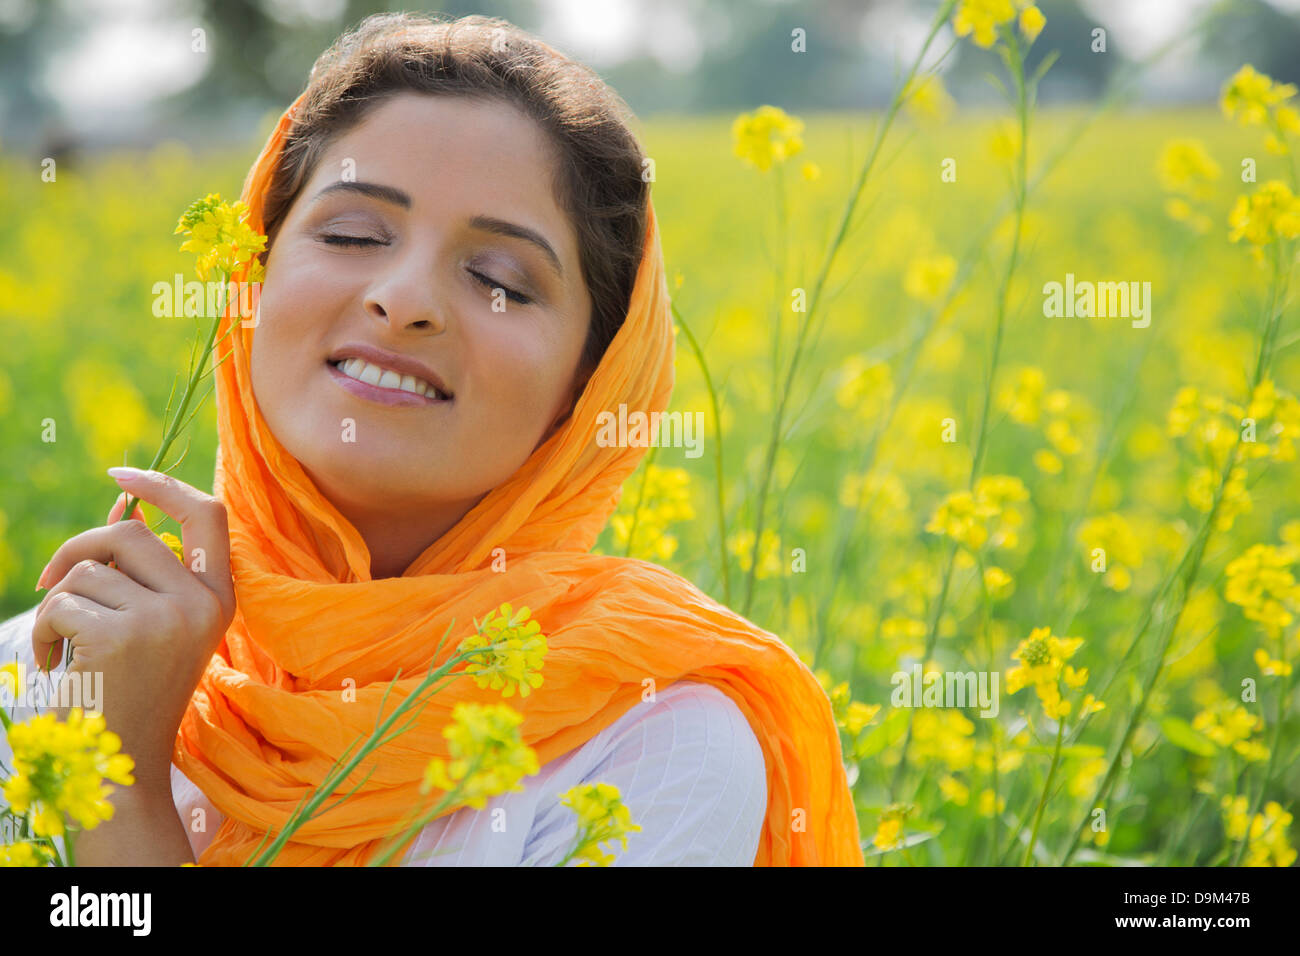 Woman holding mustard flower and smiling Stock Photo